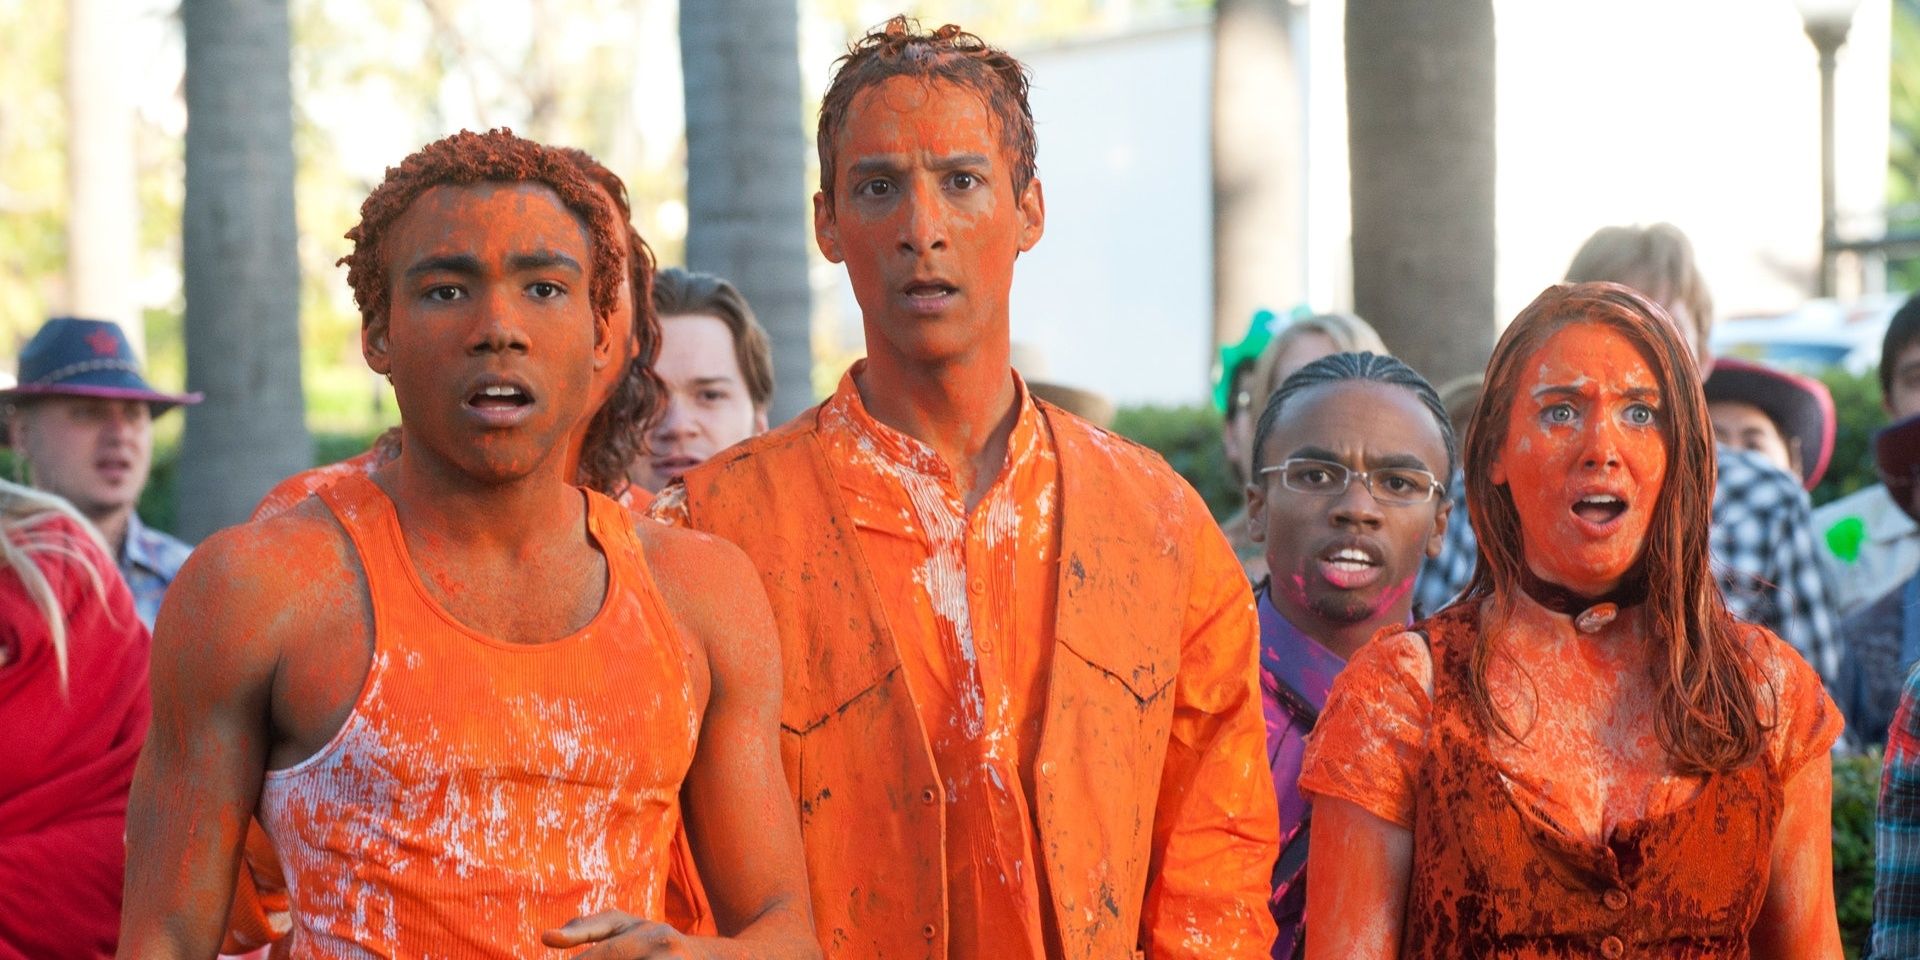 Troy, Abed, and Annie covered in orange paint in community